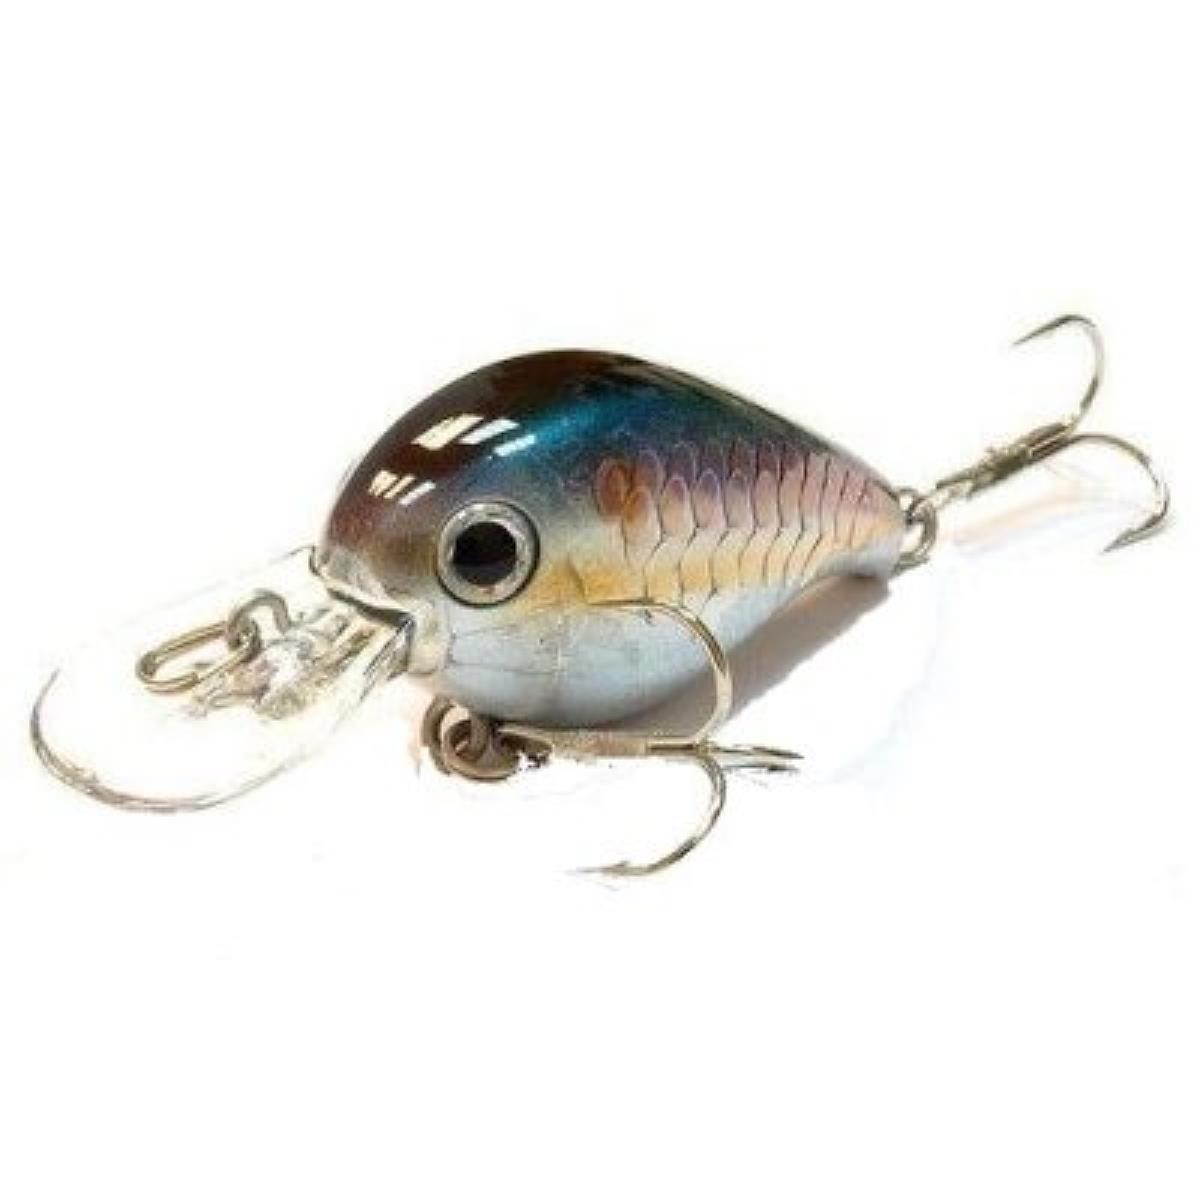 Воблер Clutch MR 270 MS American Shad Lucky Craft воблер clutch ssr 270 ms american shad lucky craft